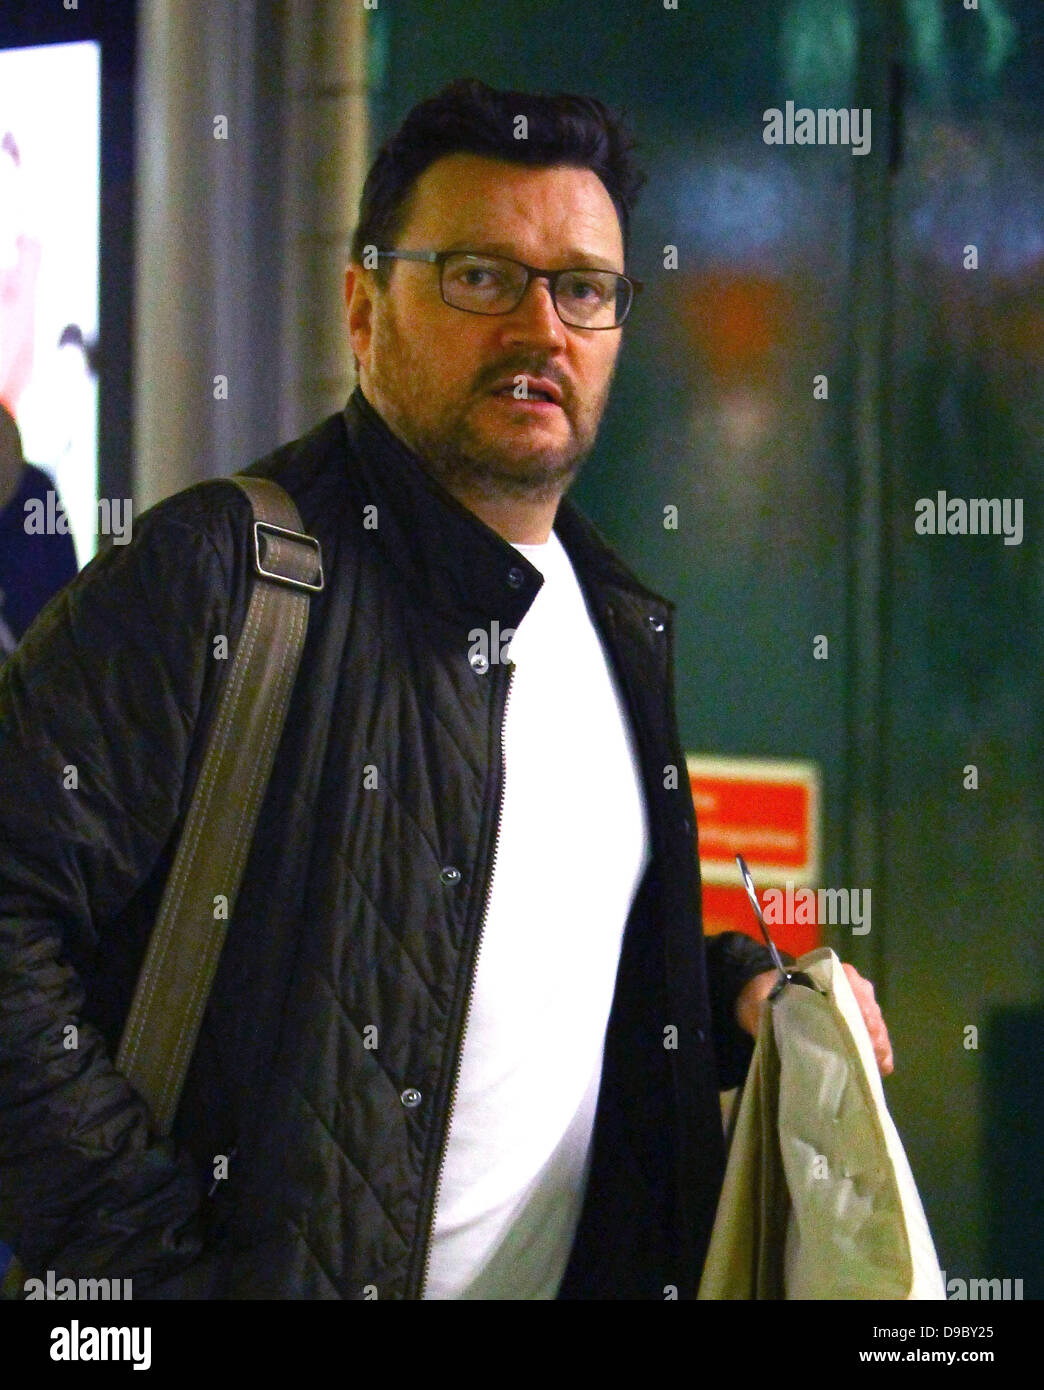 Ian Puleston-Davies The cast of Coronation Street arrive at Euston Station to head back to Manchester after attending the National Television Awards London, England - 26.01.11 Stock Photo